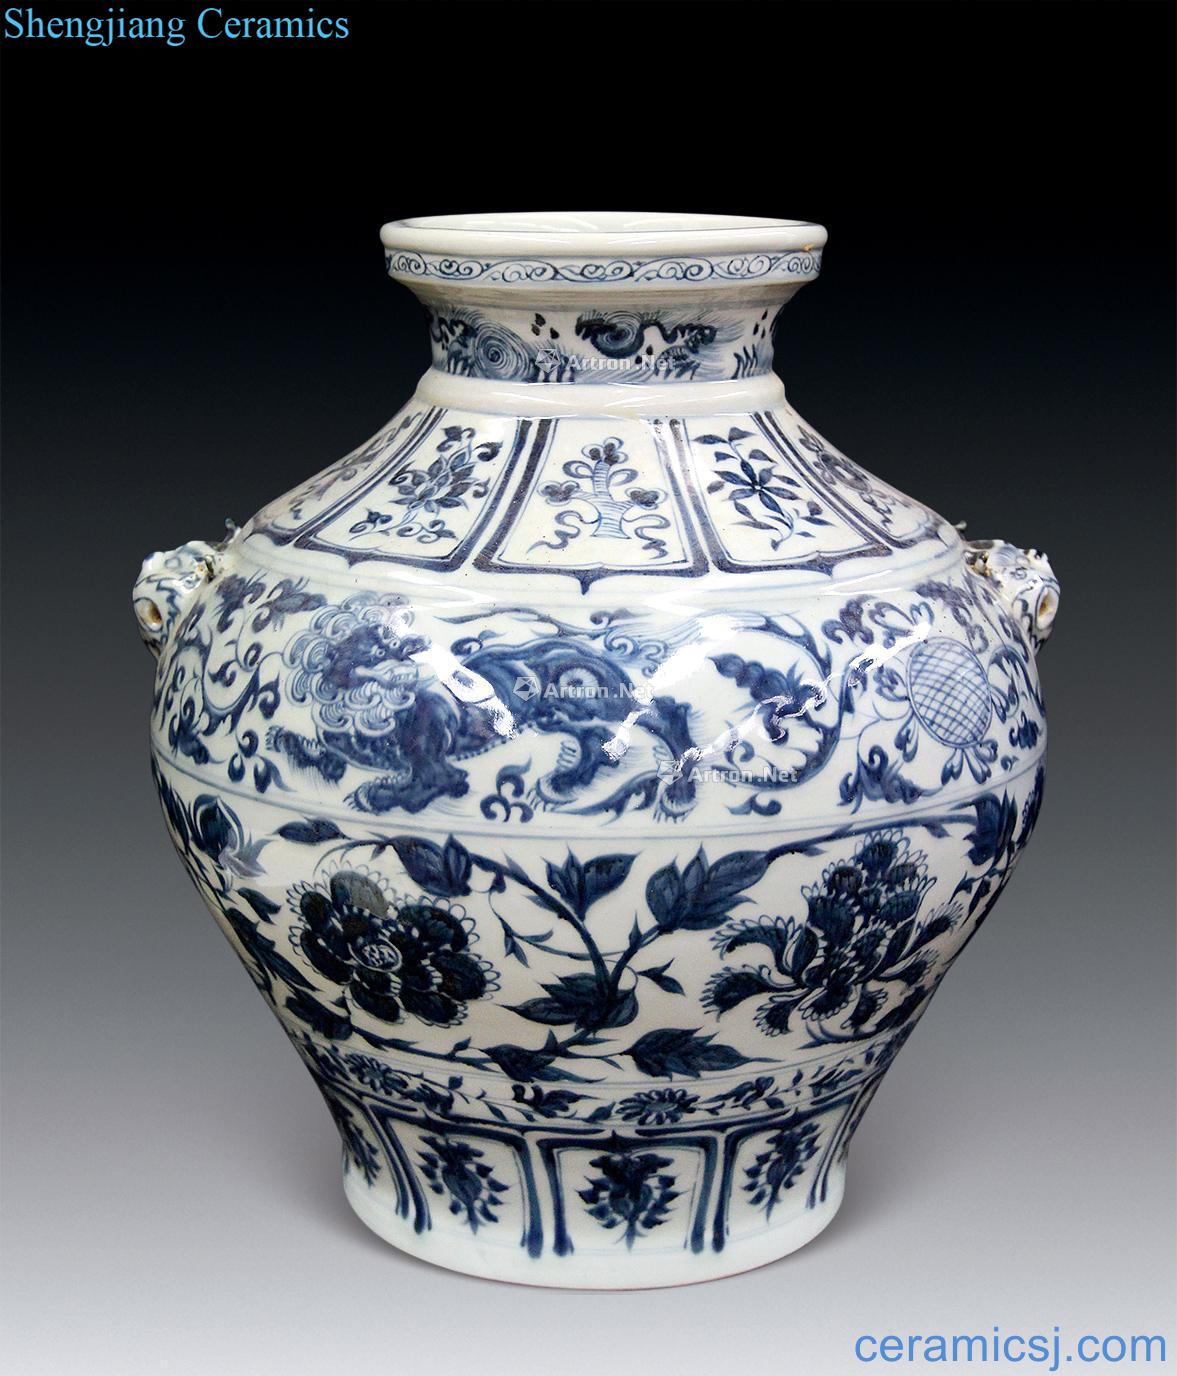 In the Ming dynasty Blue and white flowers benevolent cans